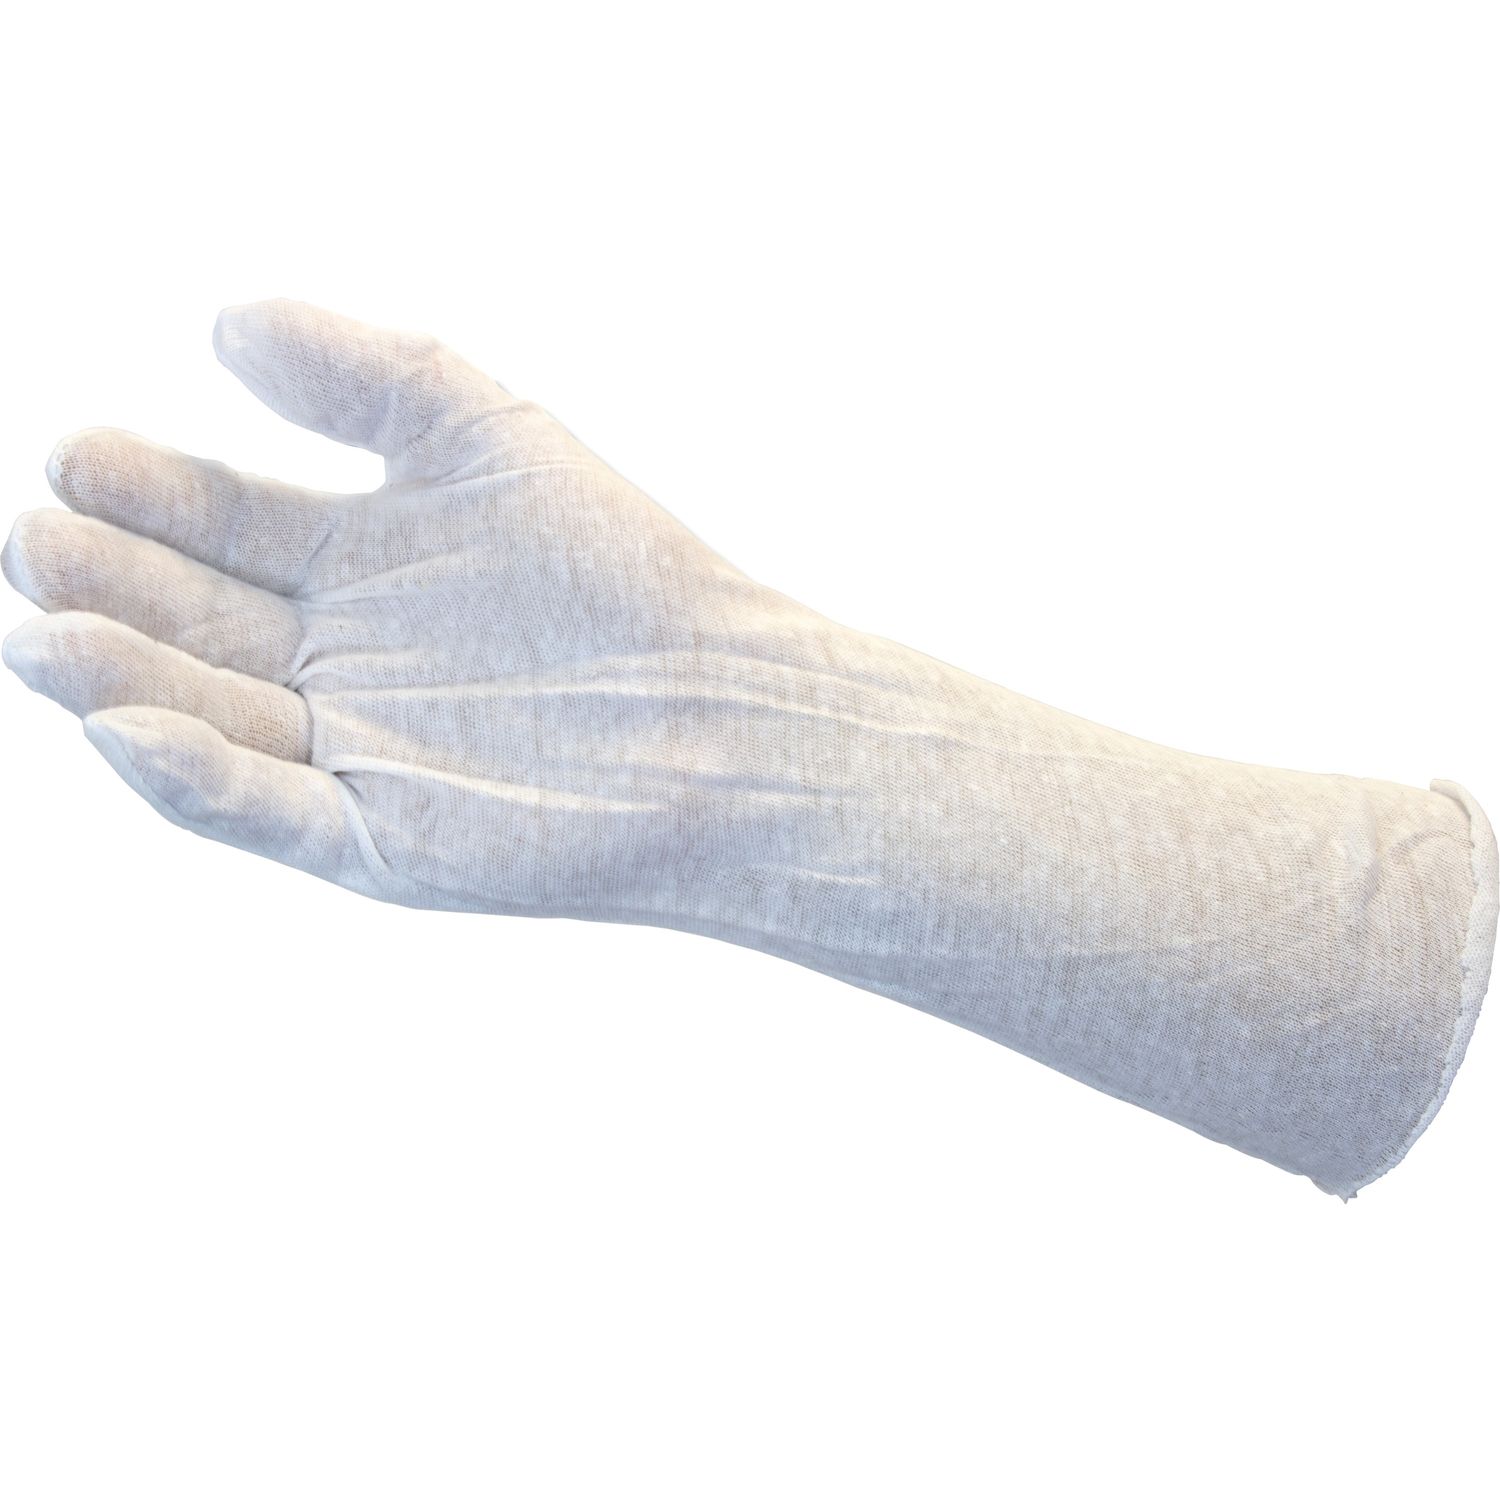 12" White Light Weight Inspectors Gloves Large Size, Two Piece Web, Cotton, White, Unhemmed Cuff, Lightweight, 12" Glove Length